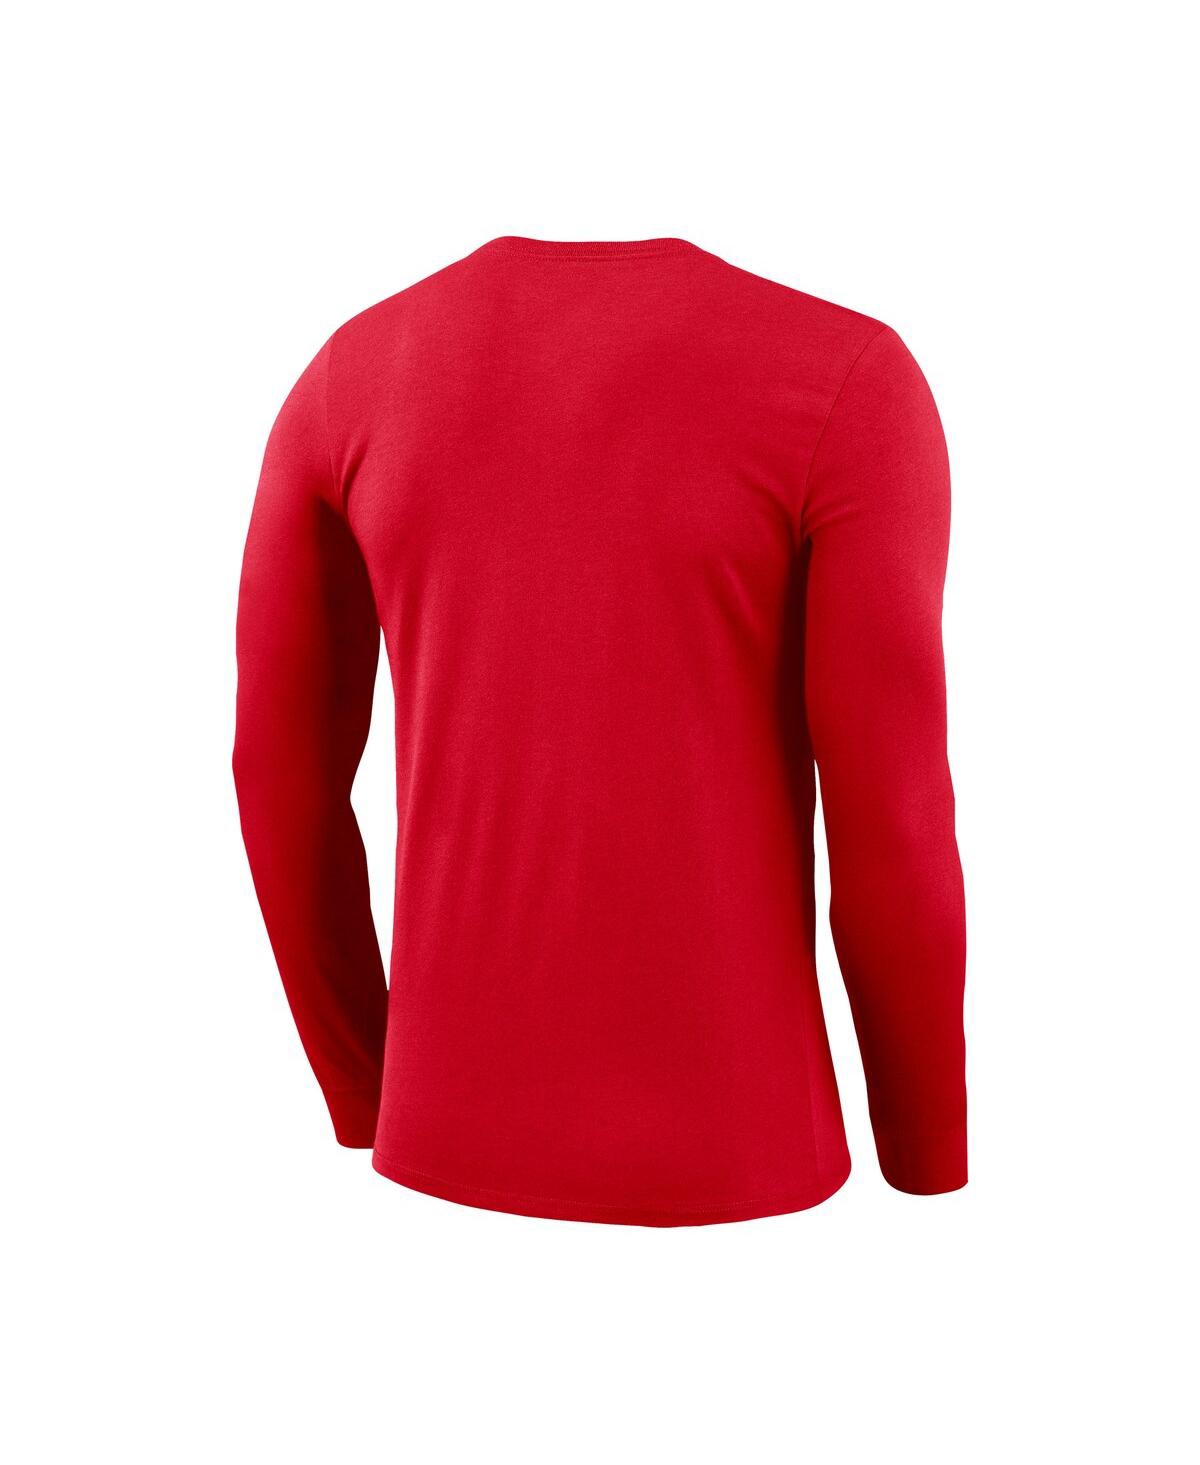 Shop Nike Men's  Red Canada Soccer Primary Logo Legend Performance Long Sleeve T-shirt